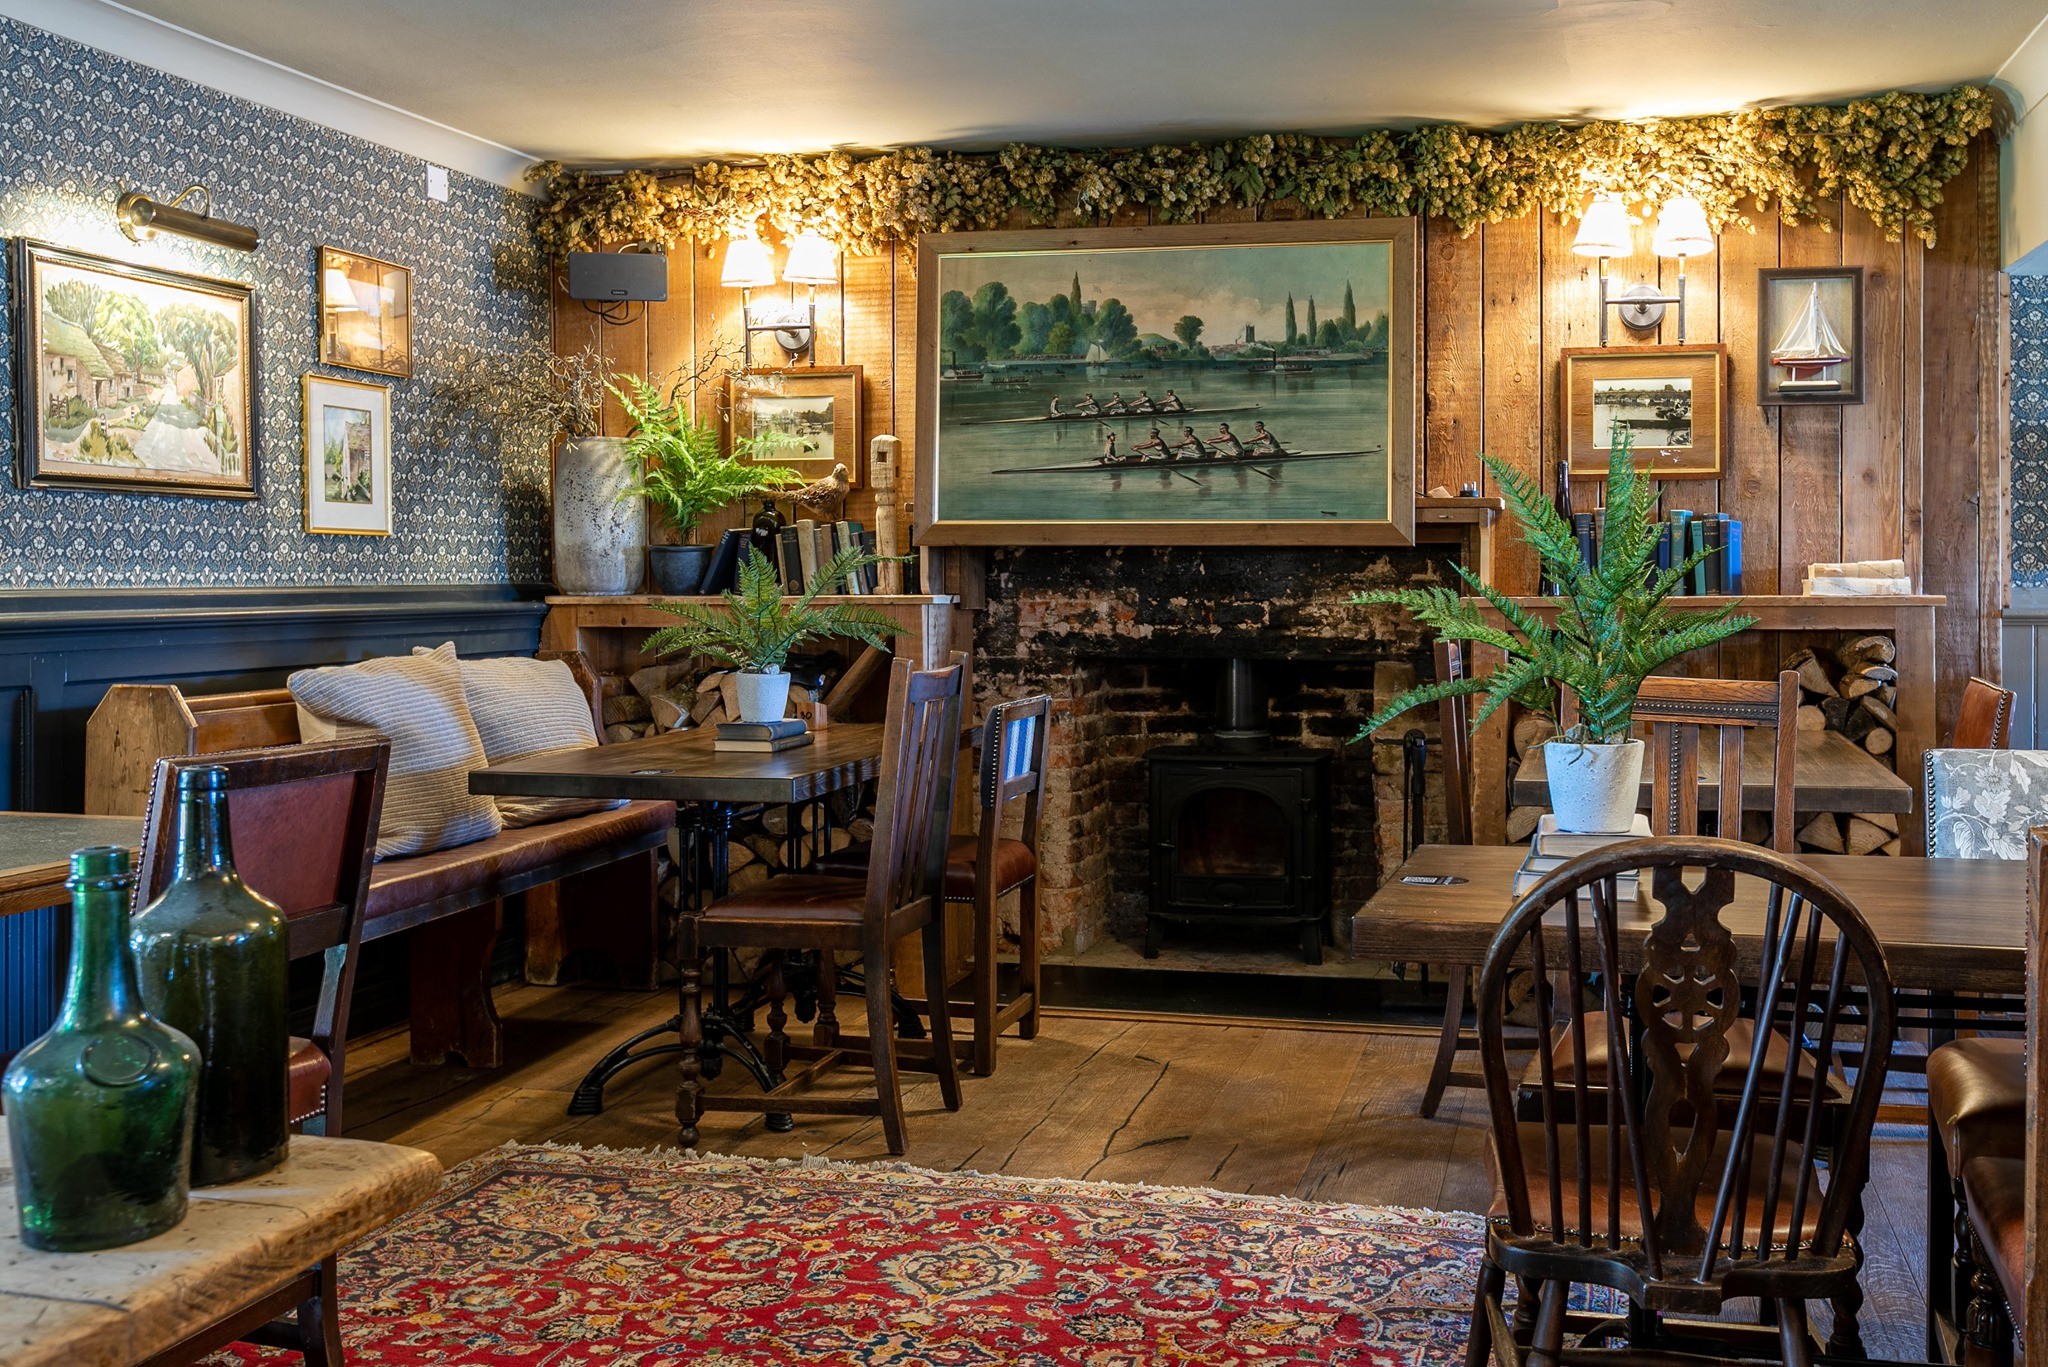 The Snug Room at The Nags Head on Thames